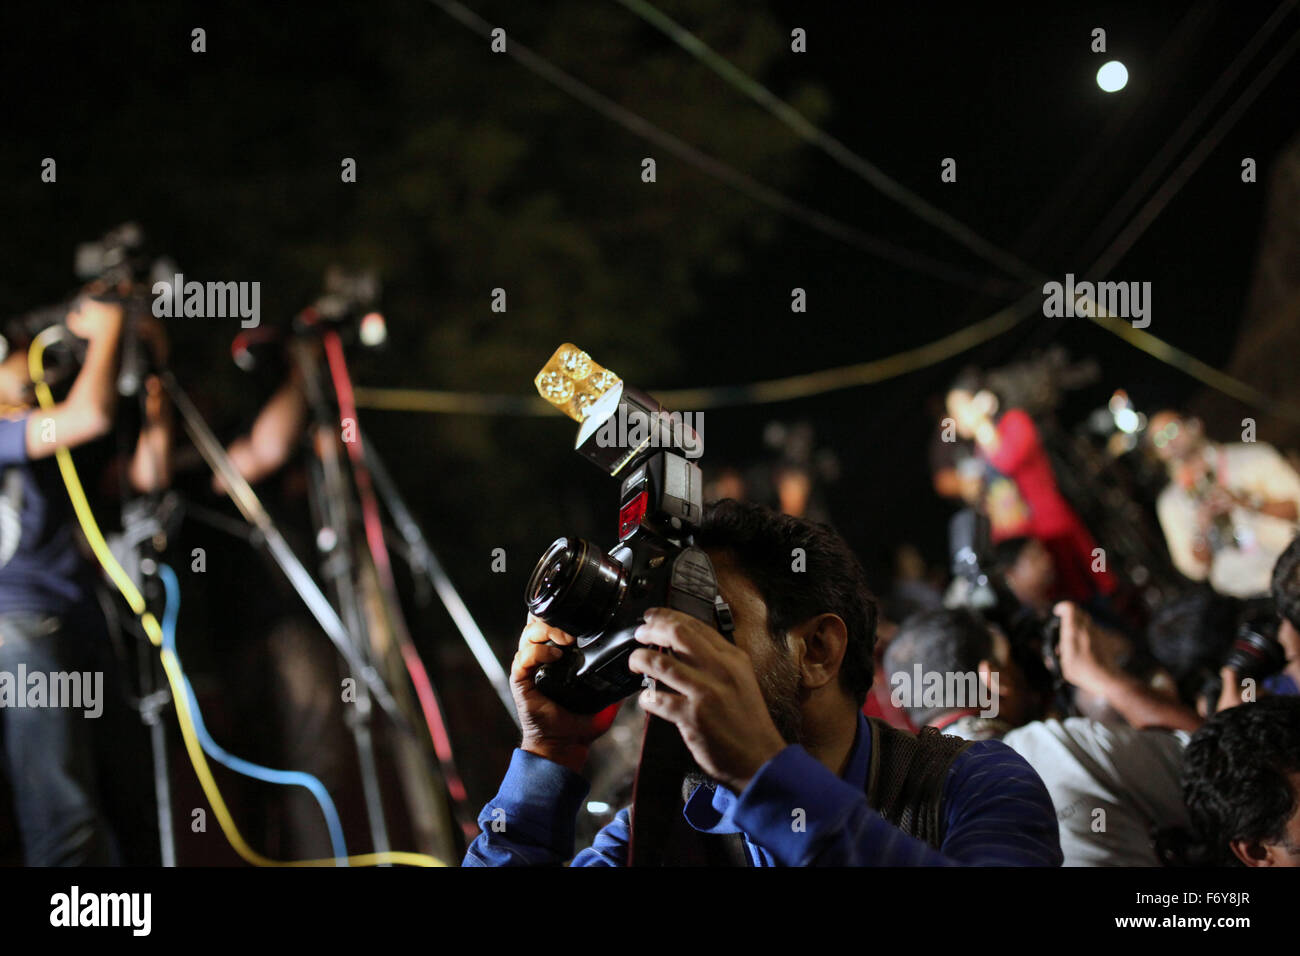 Dhaka, Bangladesh. 22nd Nov, 2015.  Media busy to covering war criminals Salauddin Quader Chowdhury and Ali Ahsan Muhammad Mojaheed's death execution in front of Dhaka Central Gate in Dhaka on November 22, 2015.Two war criminals, BNP leader Salauddin Quader Chowdhury and Jamaat-e-Islami secretary general Ali Ahsan Mohammad Mojaheed, have been executed at the same time for their crimes committed against humanity in 1971, says jail official.They were executed by hanging at 12:55am Sunday at Dhaka Central Jail, said Inspector General of Prison Syed Iftekhar Uddi © © ZUMA Press, Inc./Alamy Live Ne Stock Photo